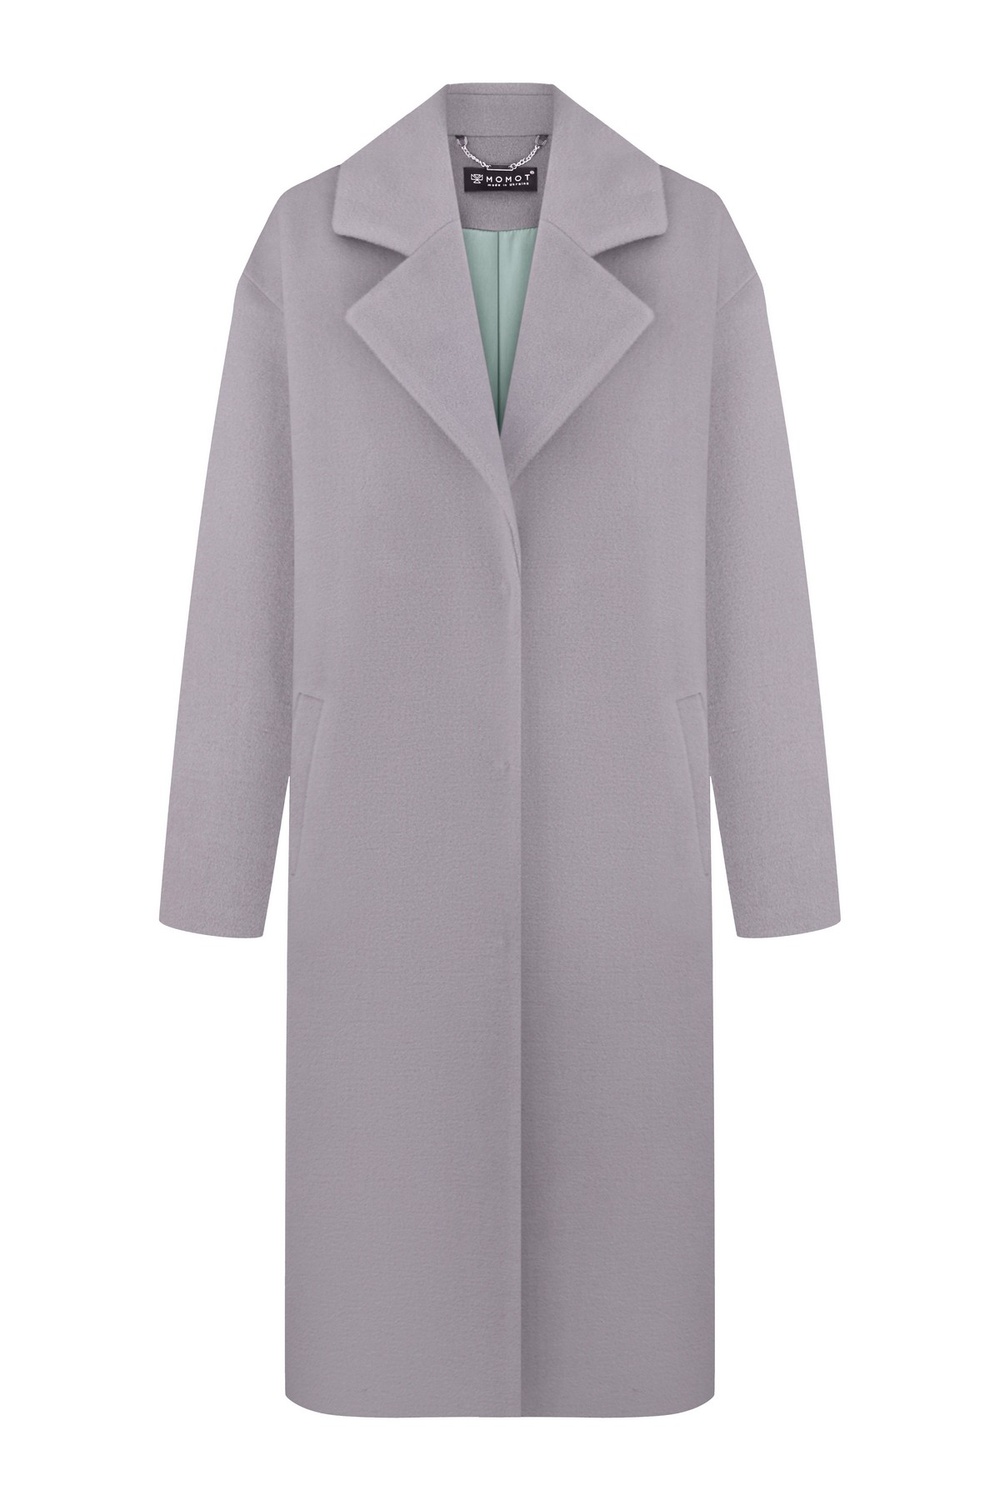 Velvety wool coat with a small pile light lavender color